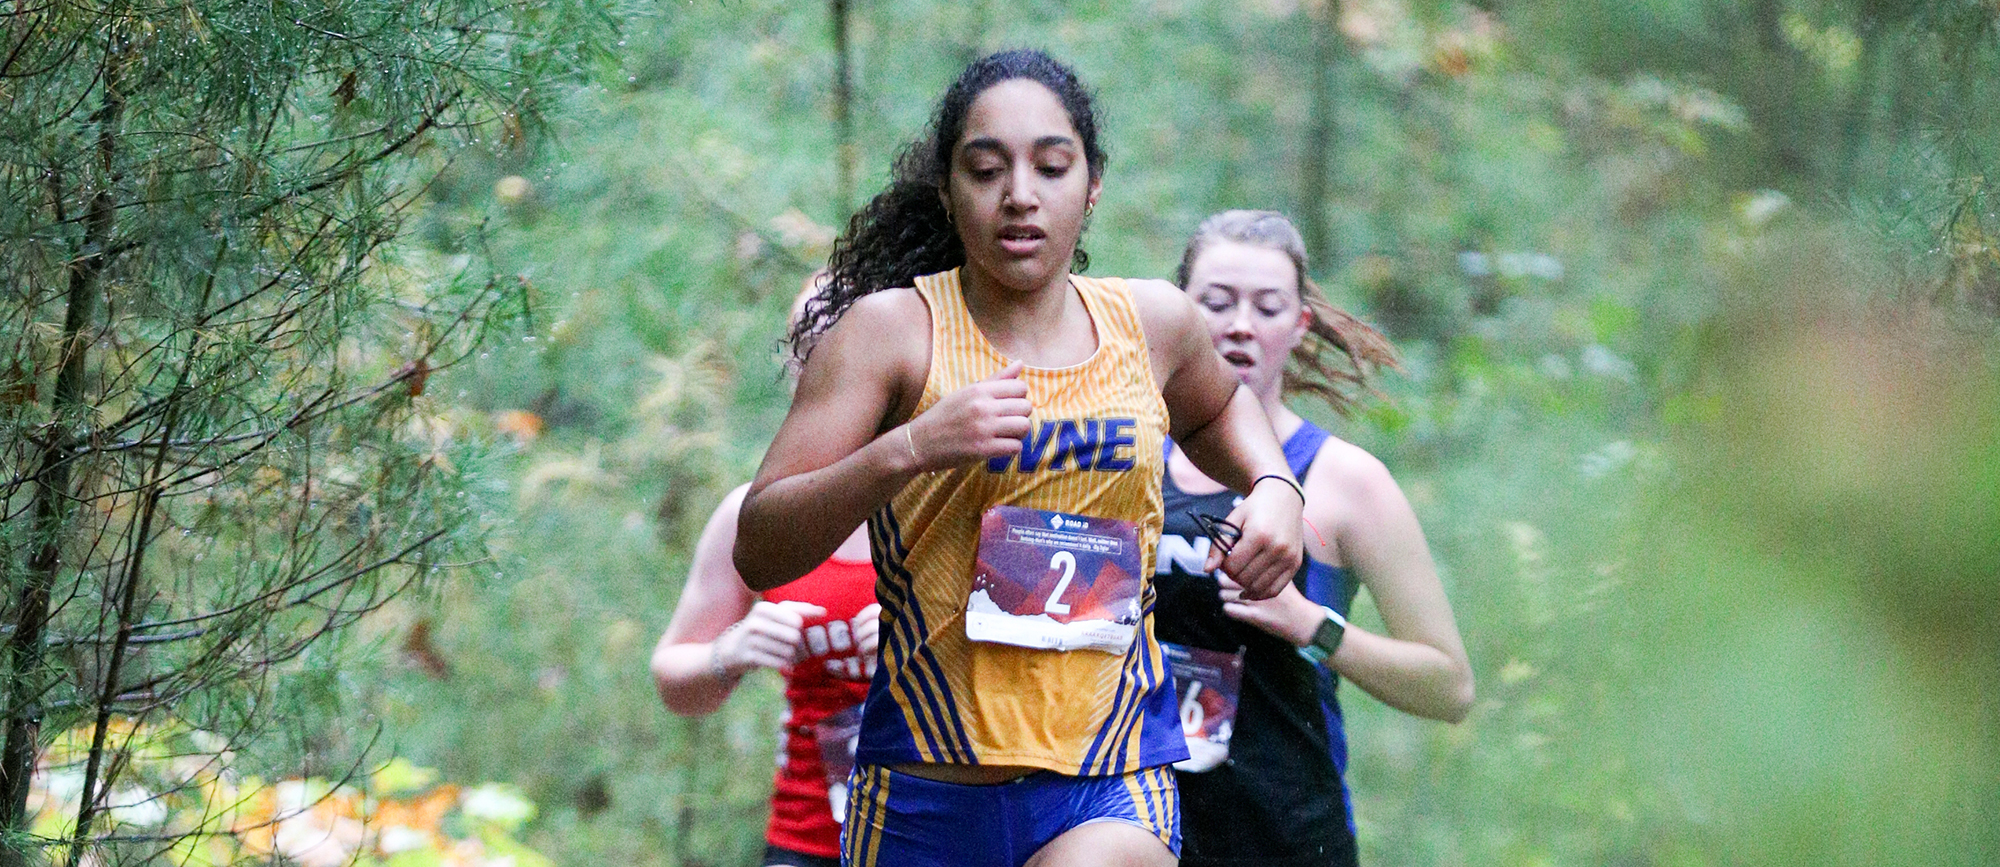 Edelinda Baptista placed 70th at the Jim Sheehan Memorial Invitational on Saturday. (Photo by Chris Marion)